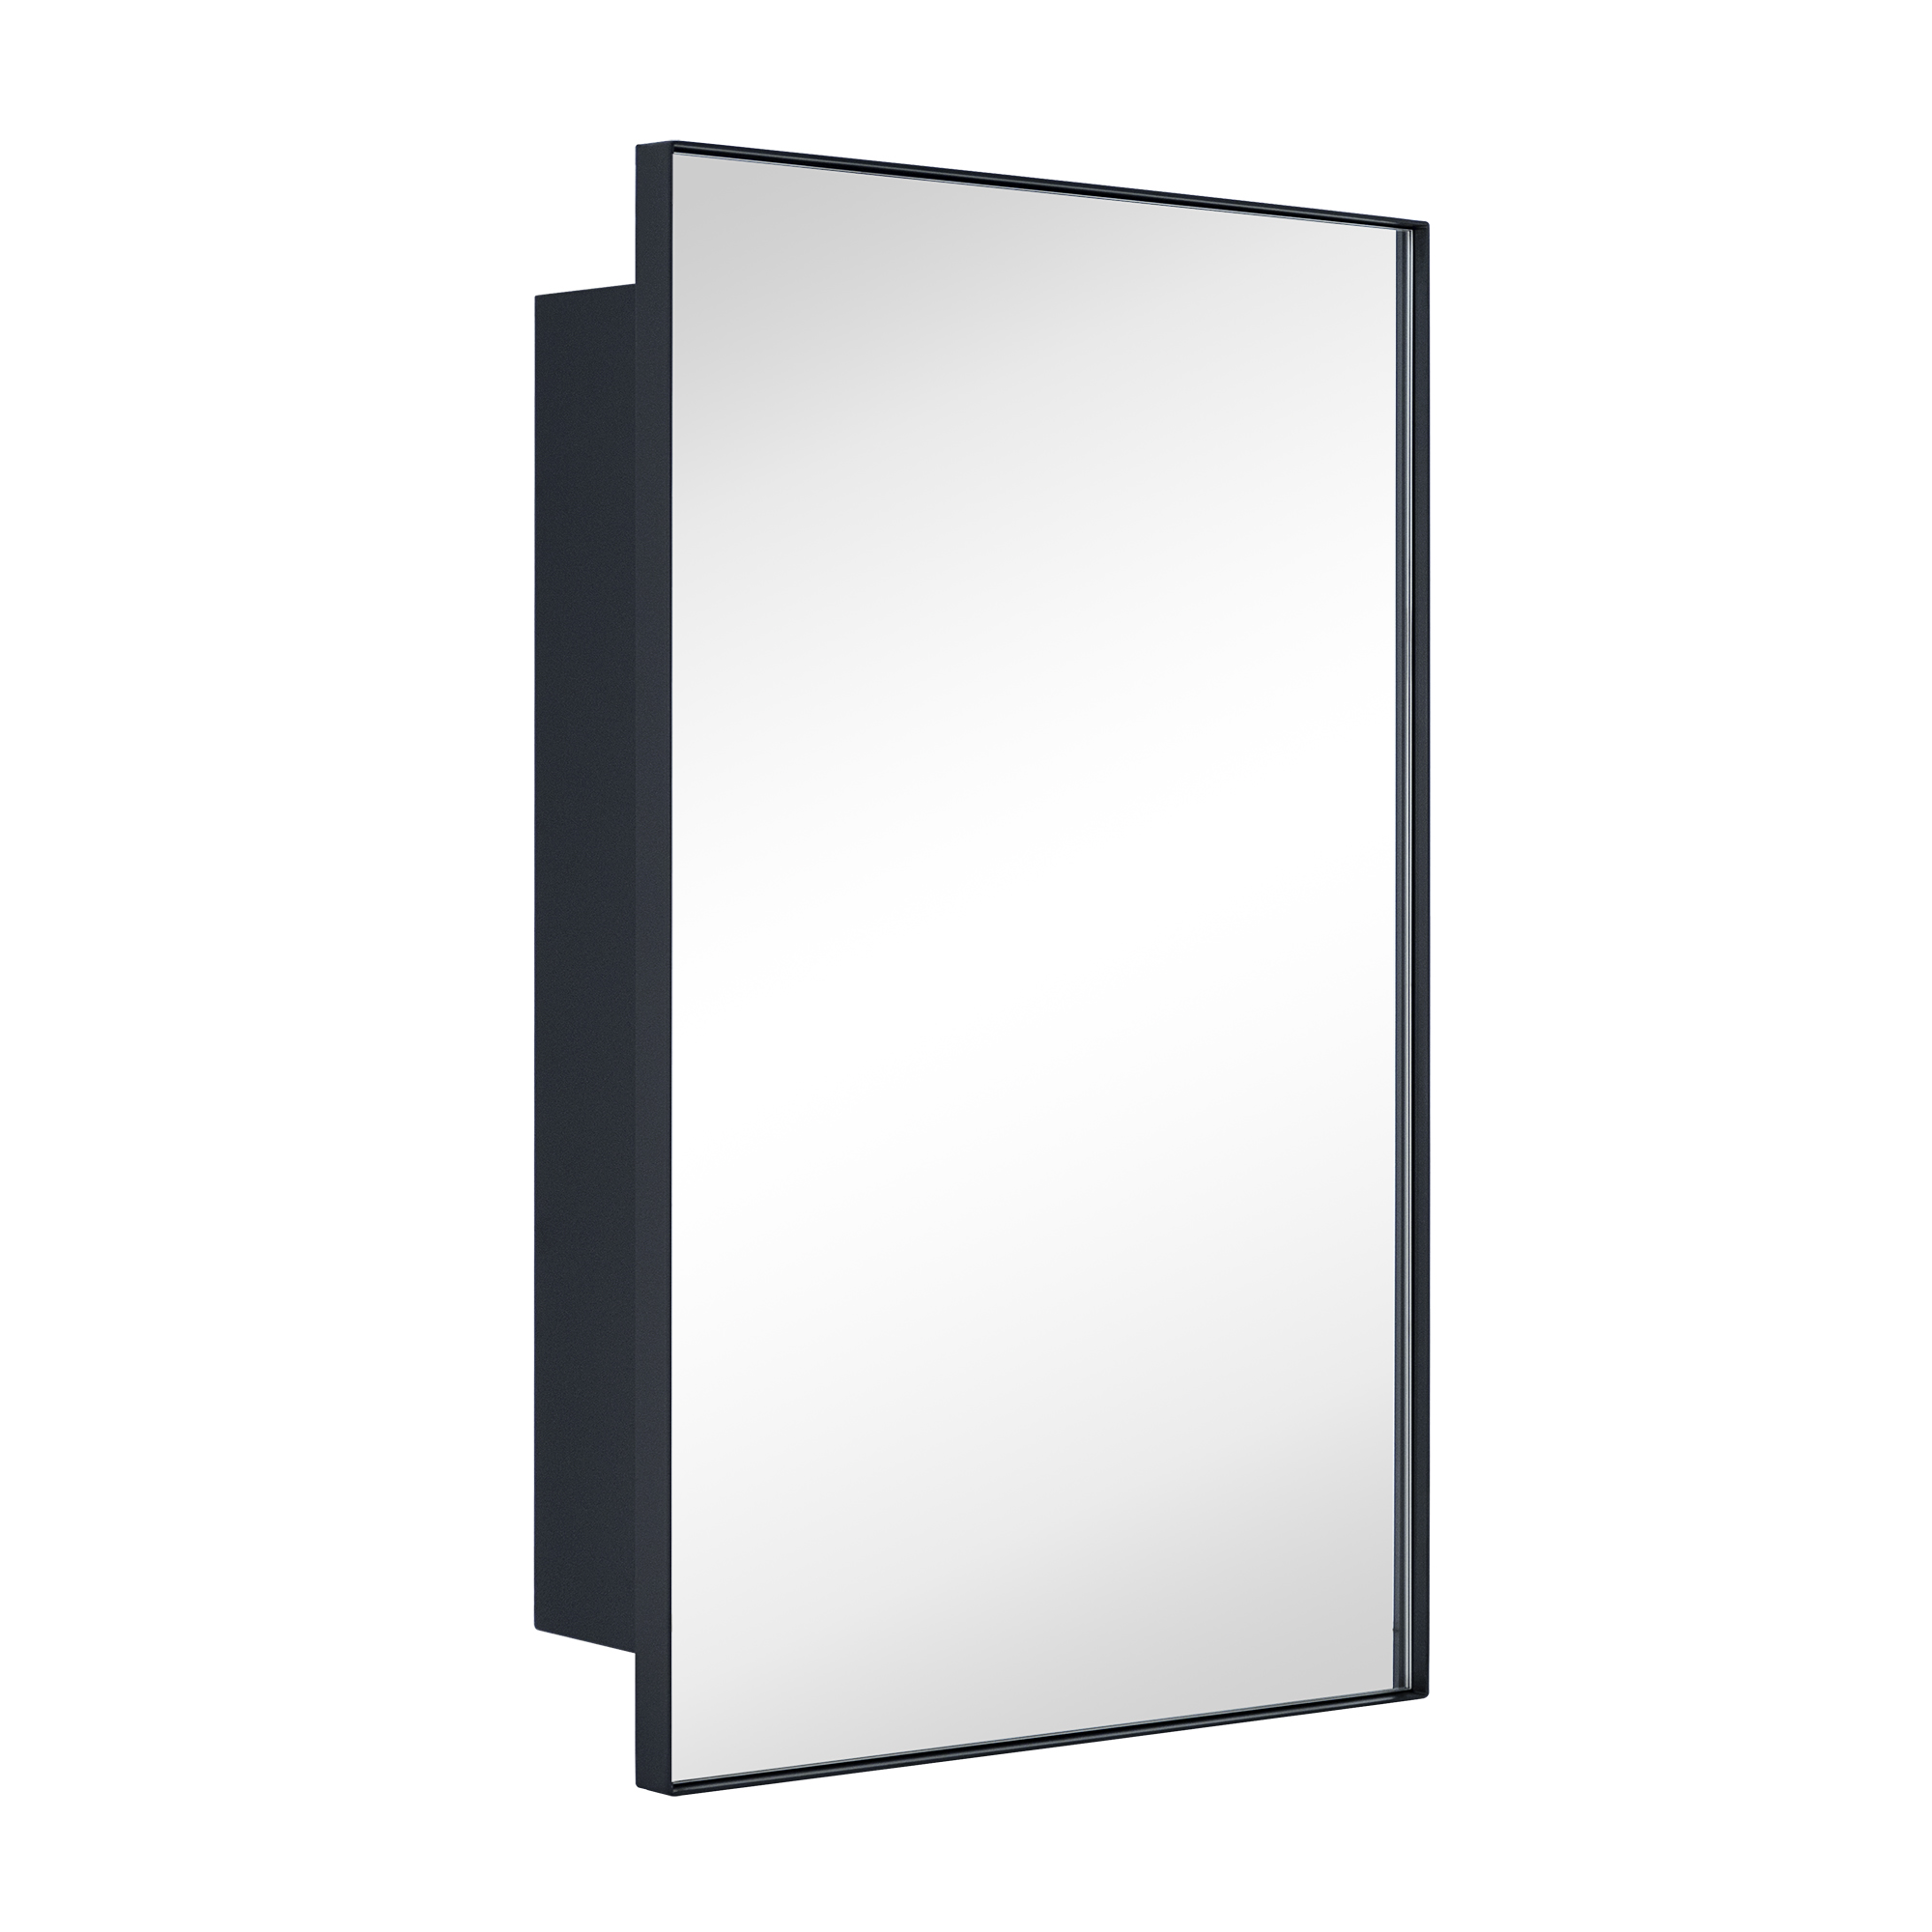 TEHOME Recessed Mount 16x26'' Squared Rectangle Black Bathroom Medicine Cabinet with Mirror Matt Black Metal Framed Rectanglular Medicine Cabinet 2 Adjustable Glass Shelves